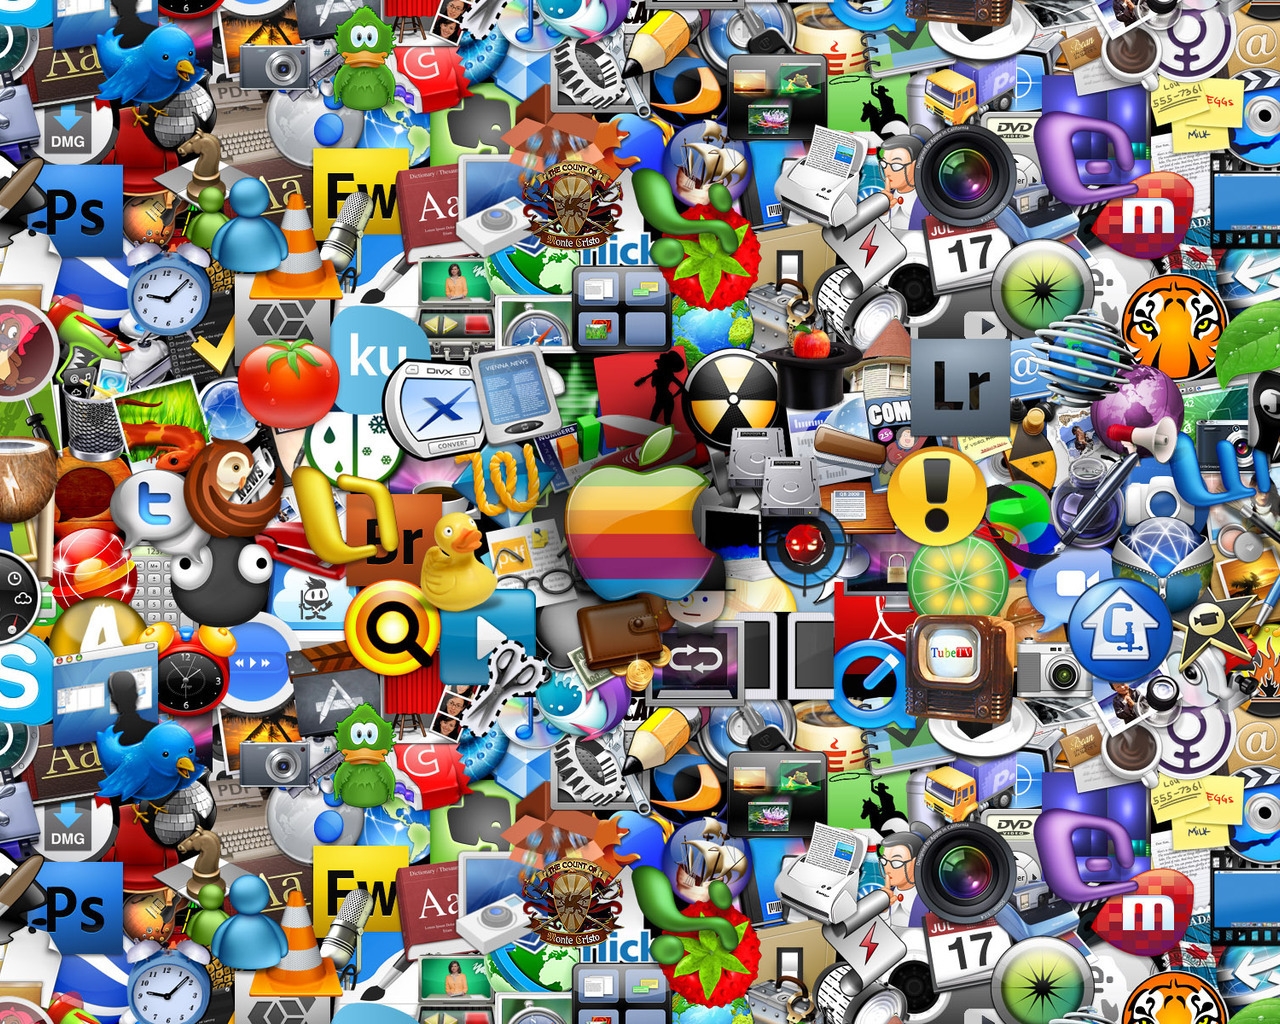 Icons for 1280 x 1024 resolution